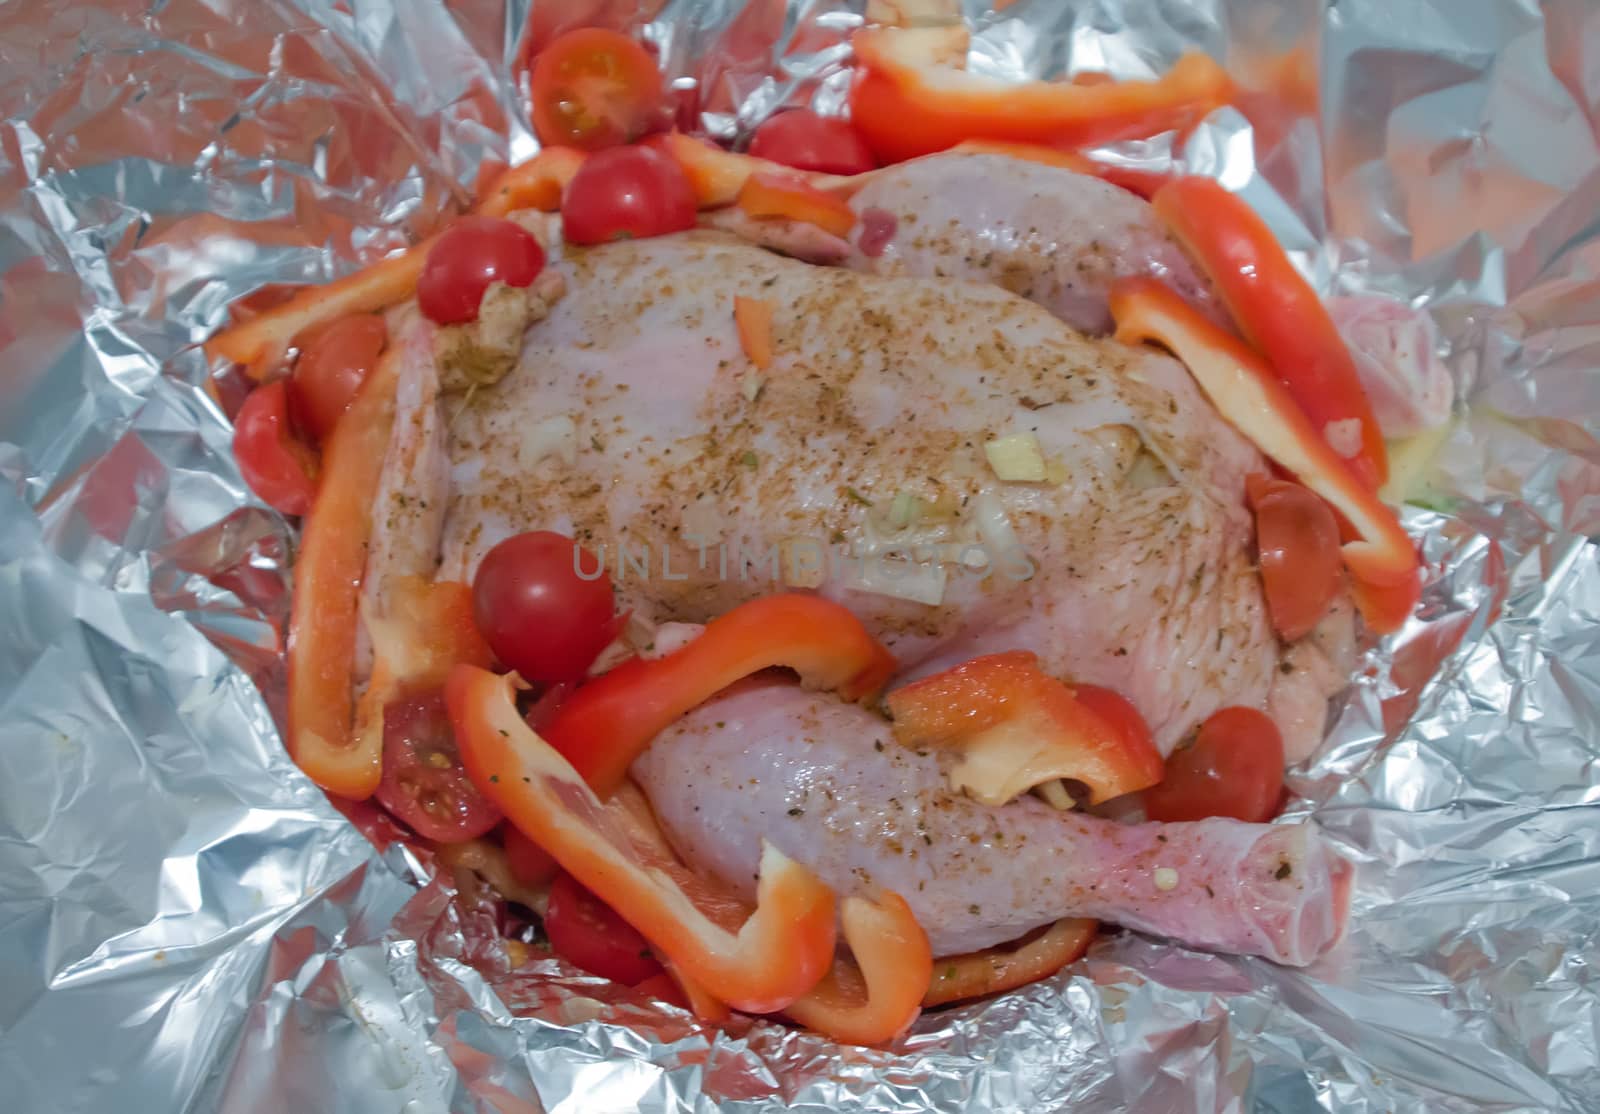 Chicken baked in foil with vegetables by max51288